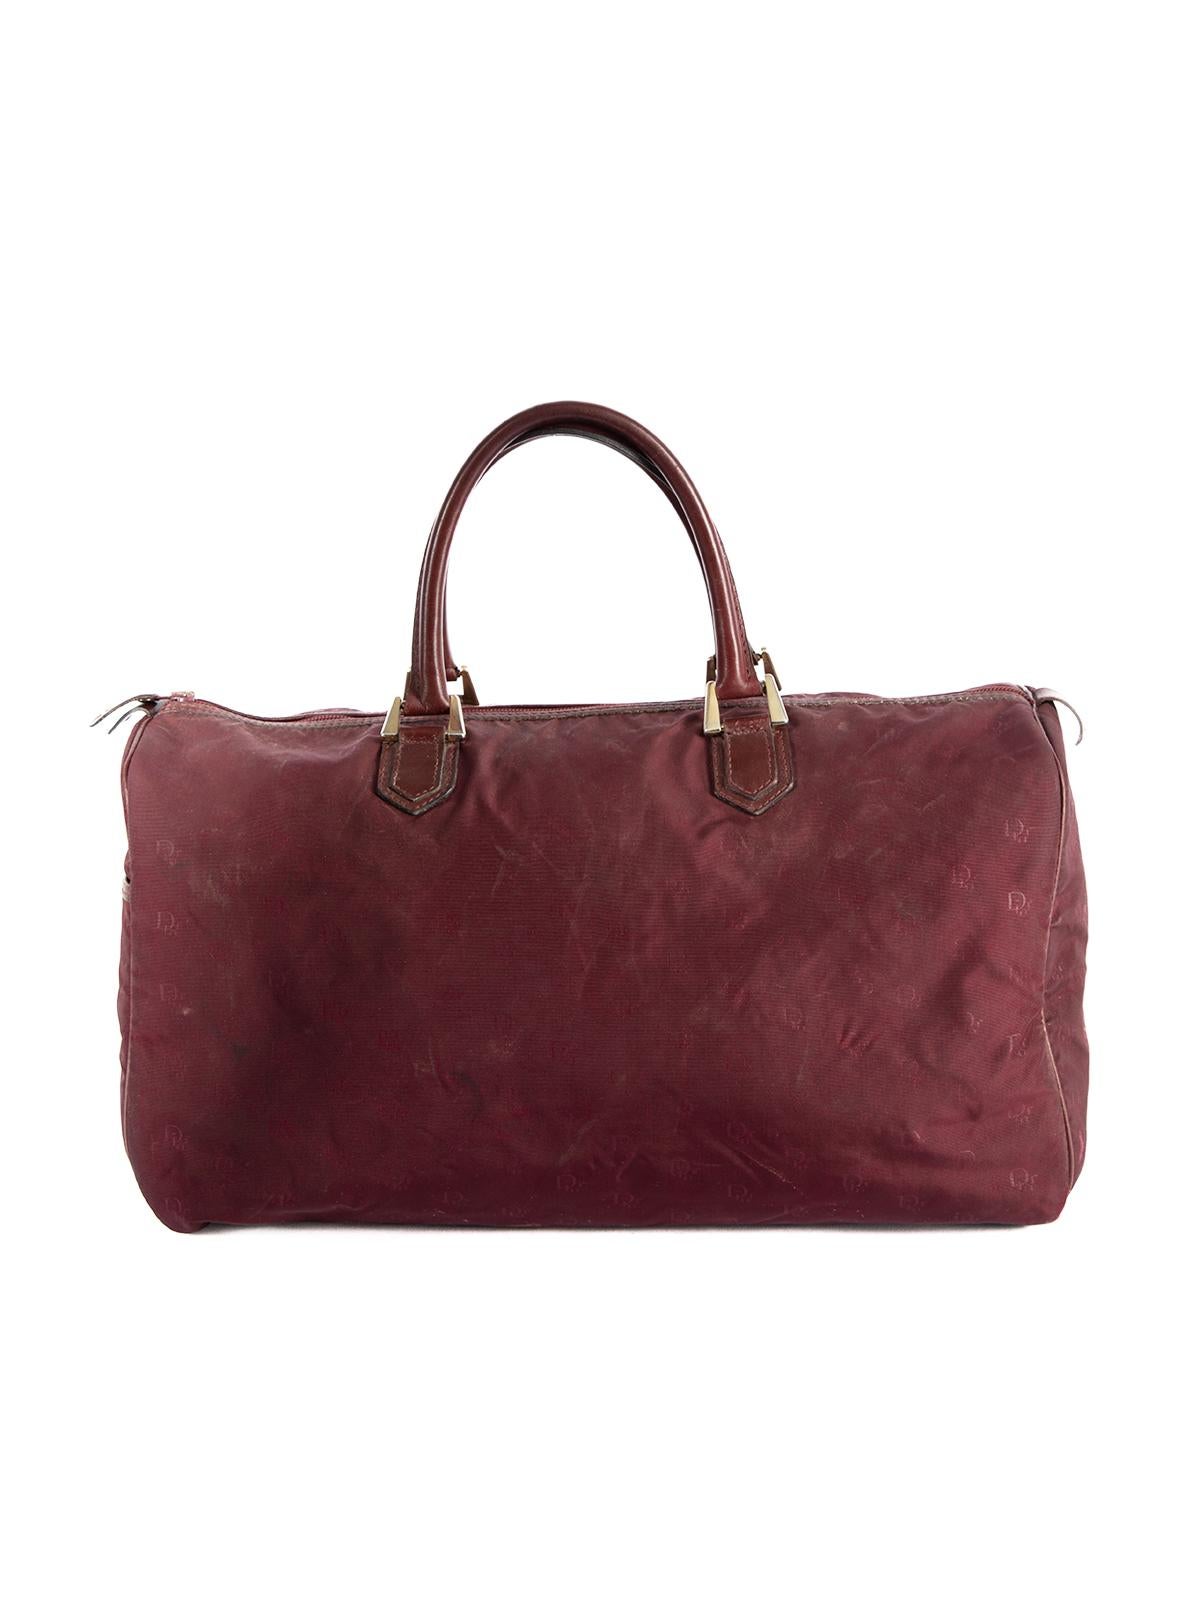 Dior Women's Vintage Burgundy Trotter Duffle Bag In Good Condition For Sale In London, GB